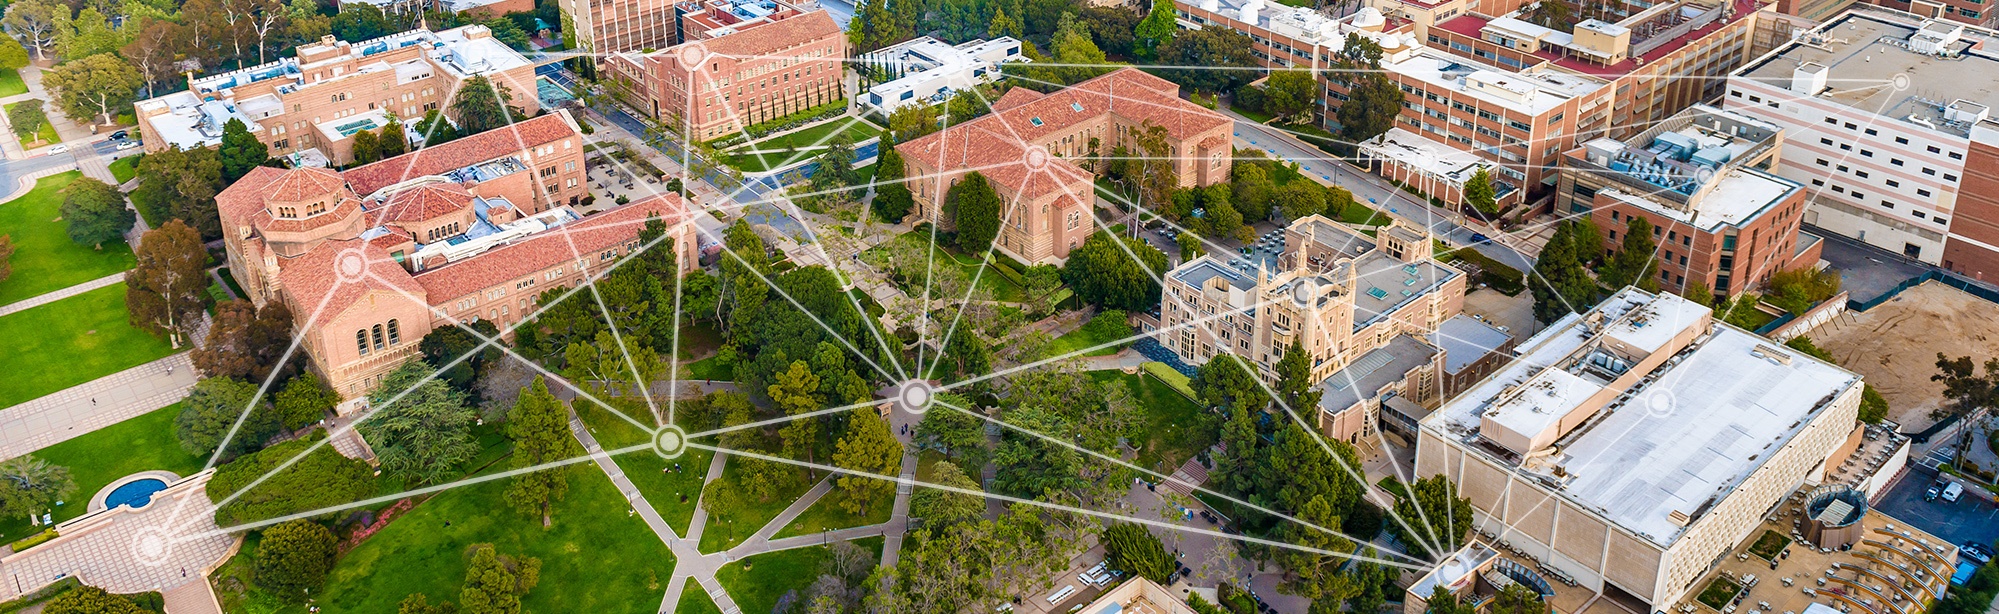 view of college campus connected by technology lines